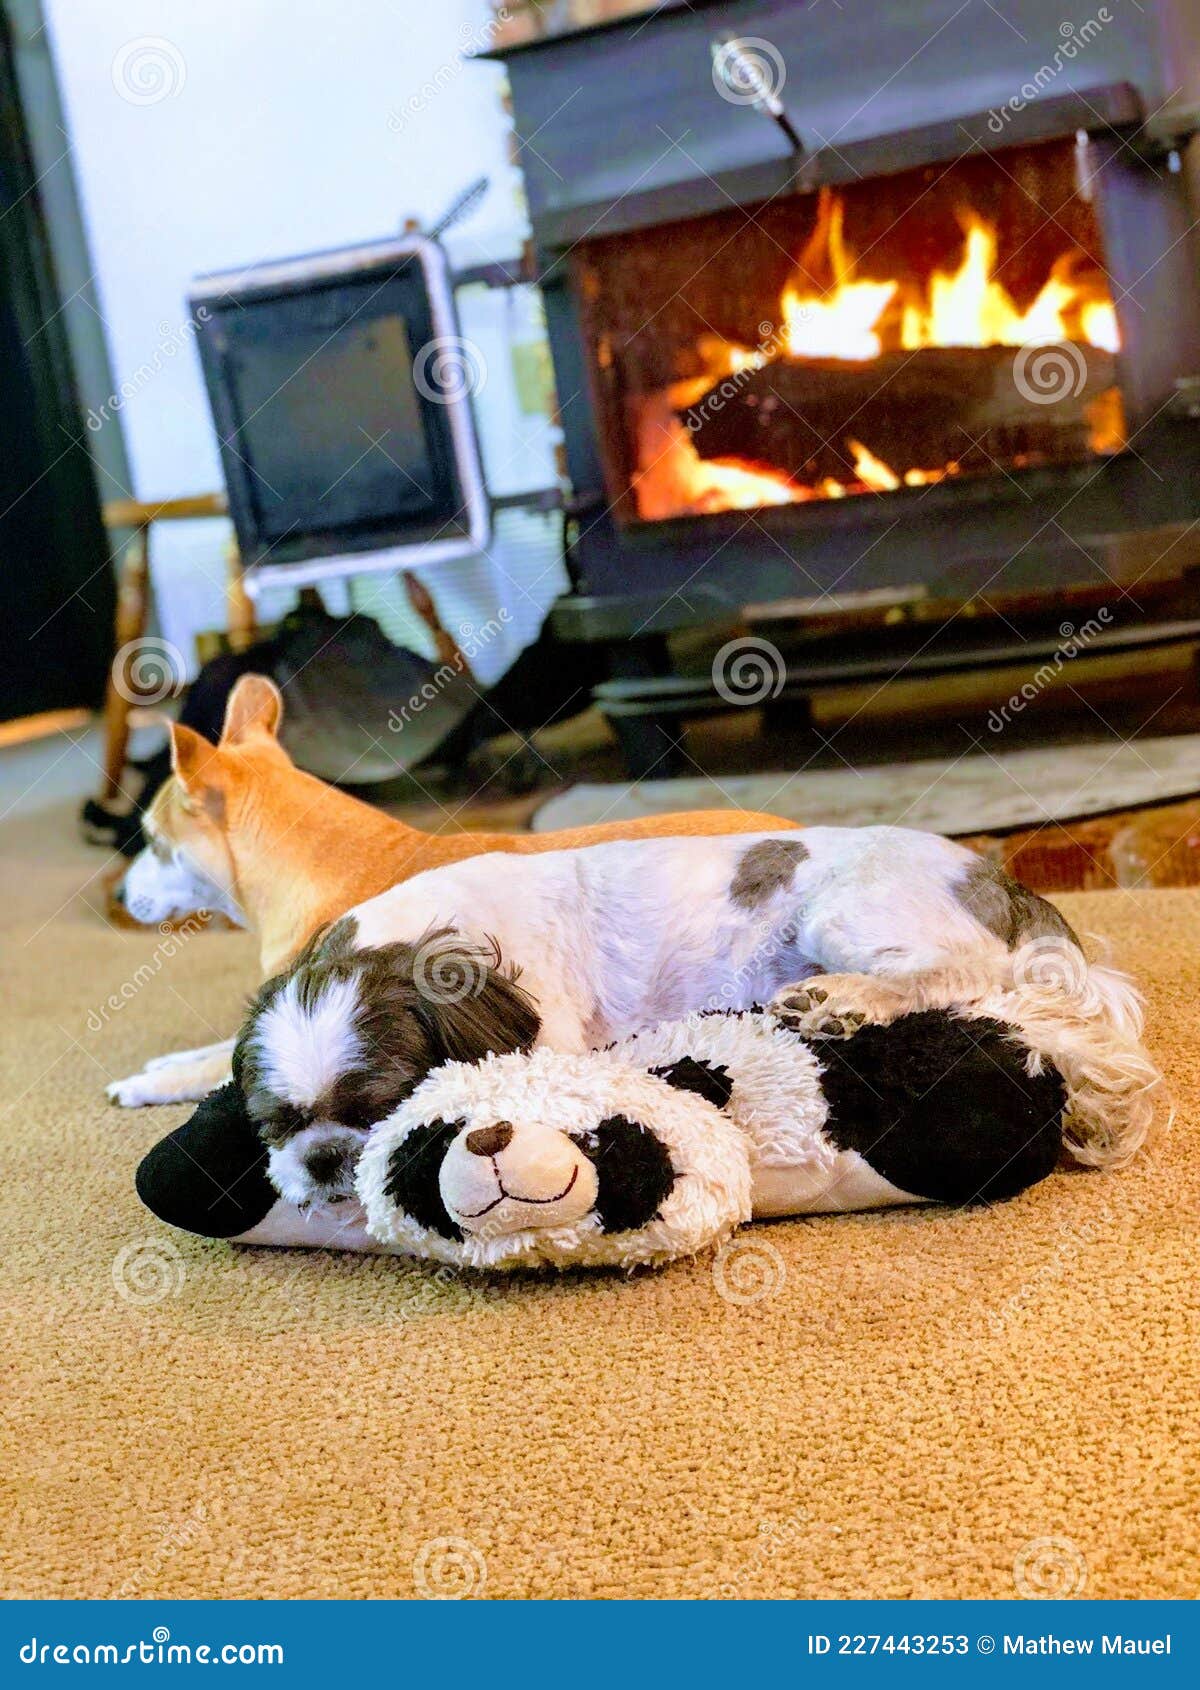 sleeping in front of a fire